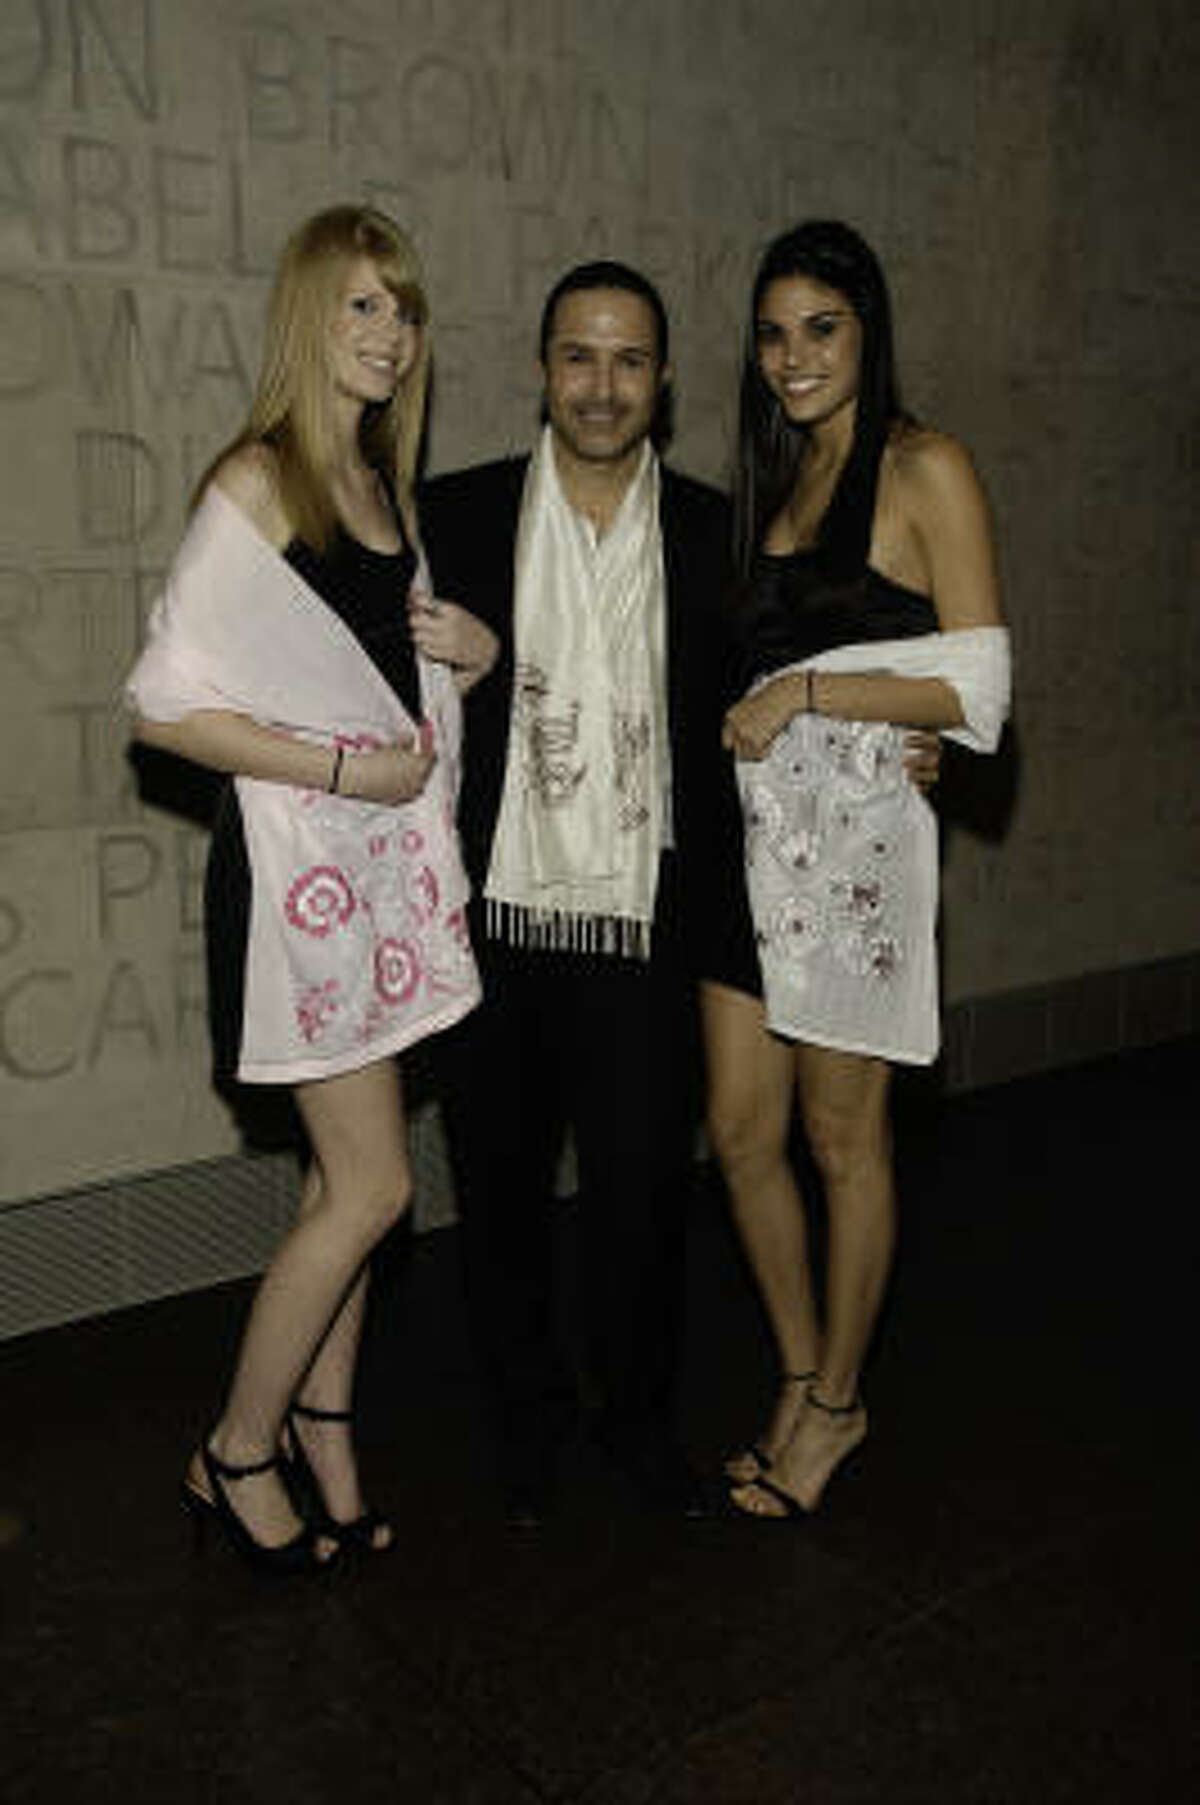 Matin poses with models wearing Afghan Hands scarves at the Museum of Fine Arts Houston.